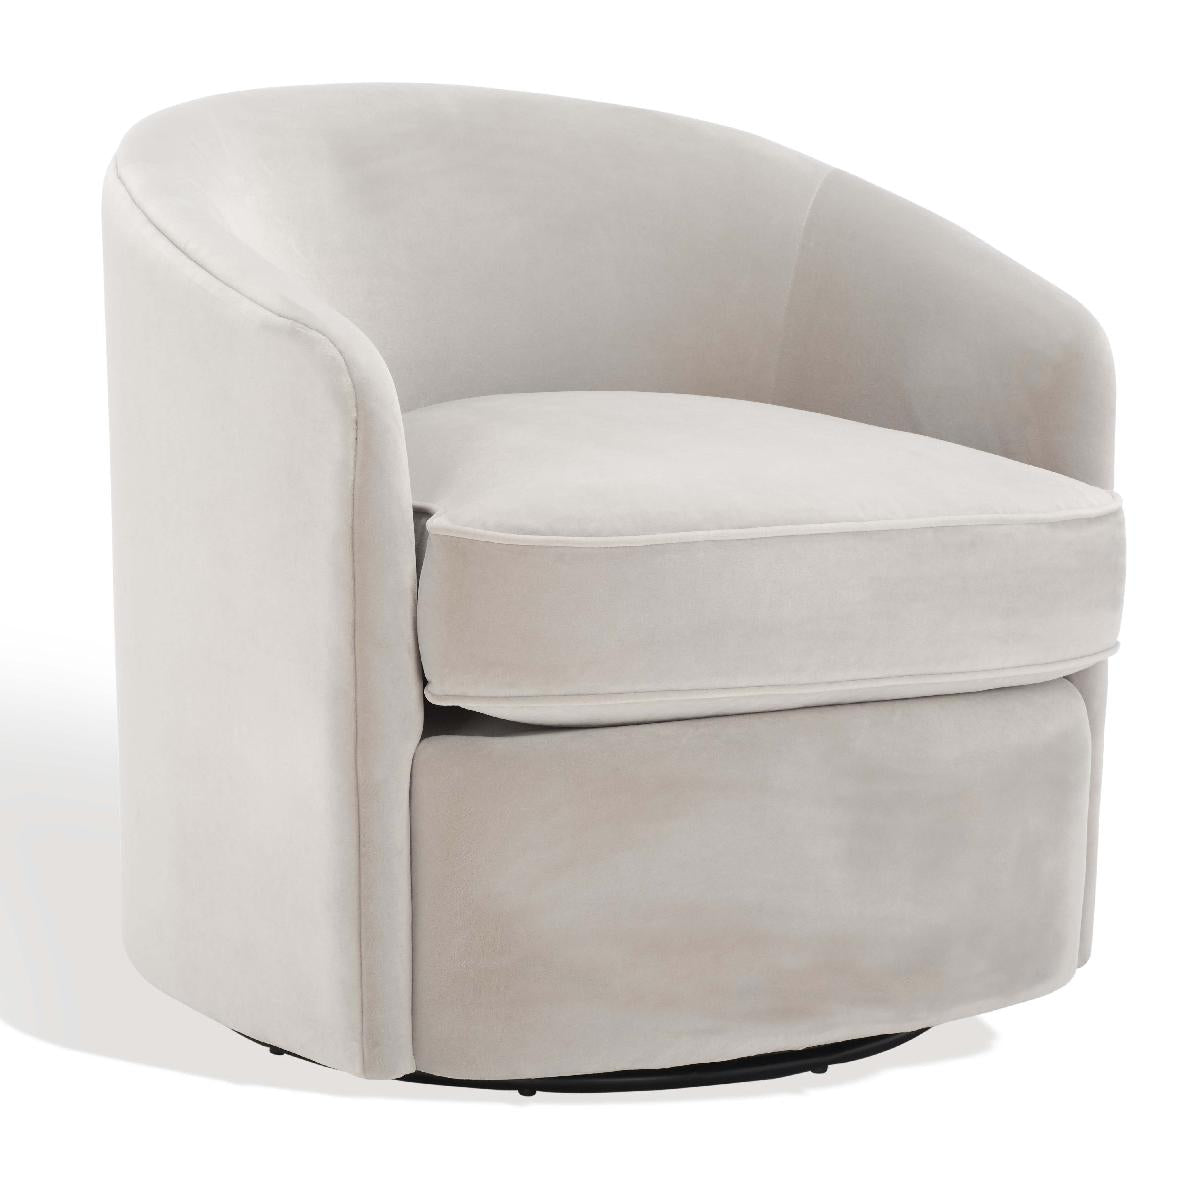 Safavieh Couture Lesley Swivel Barrel Chair